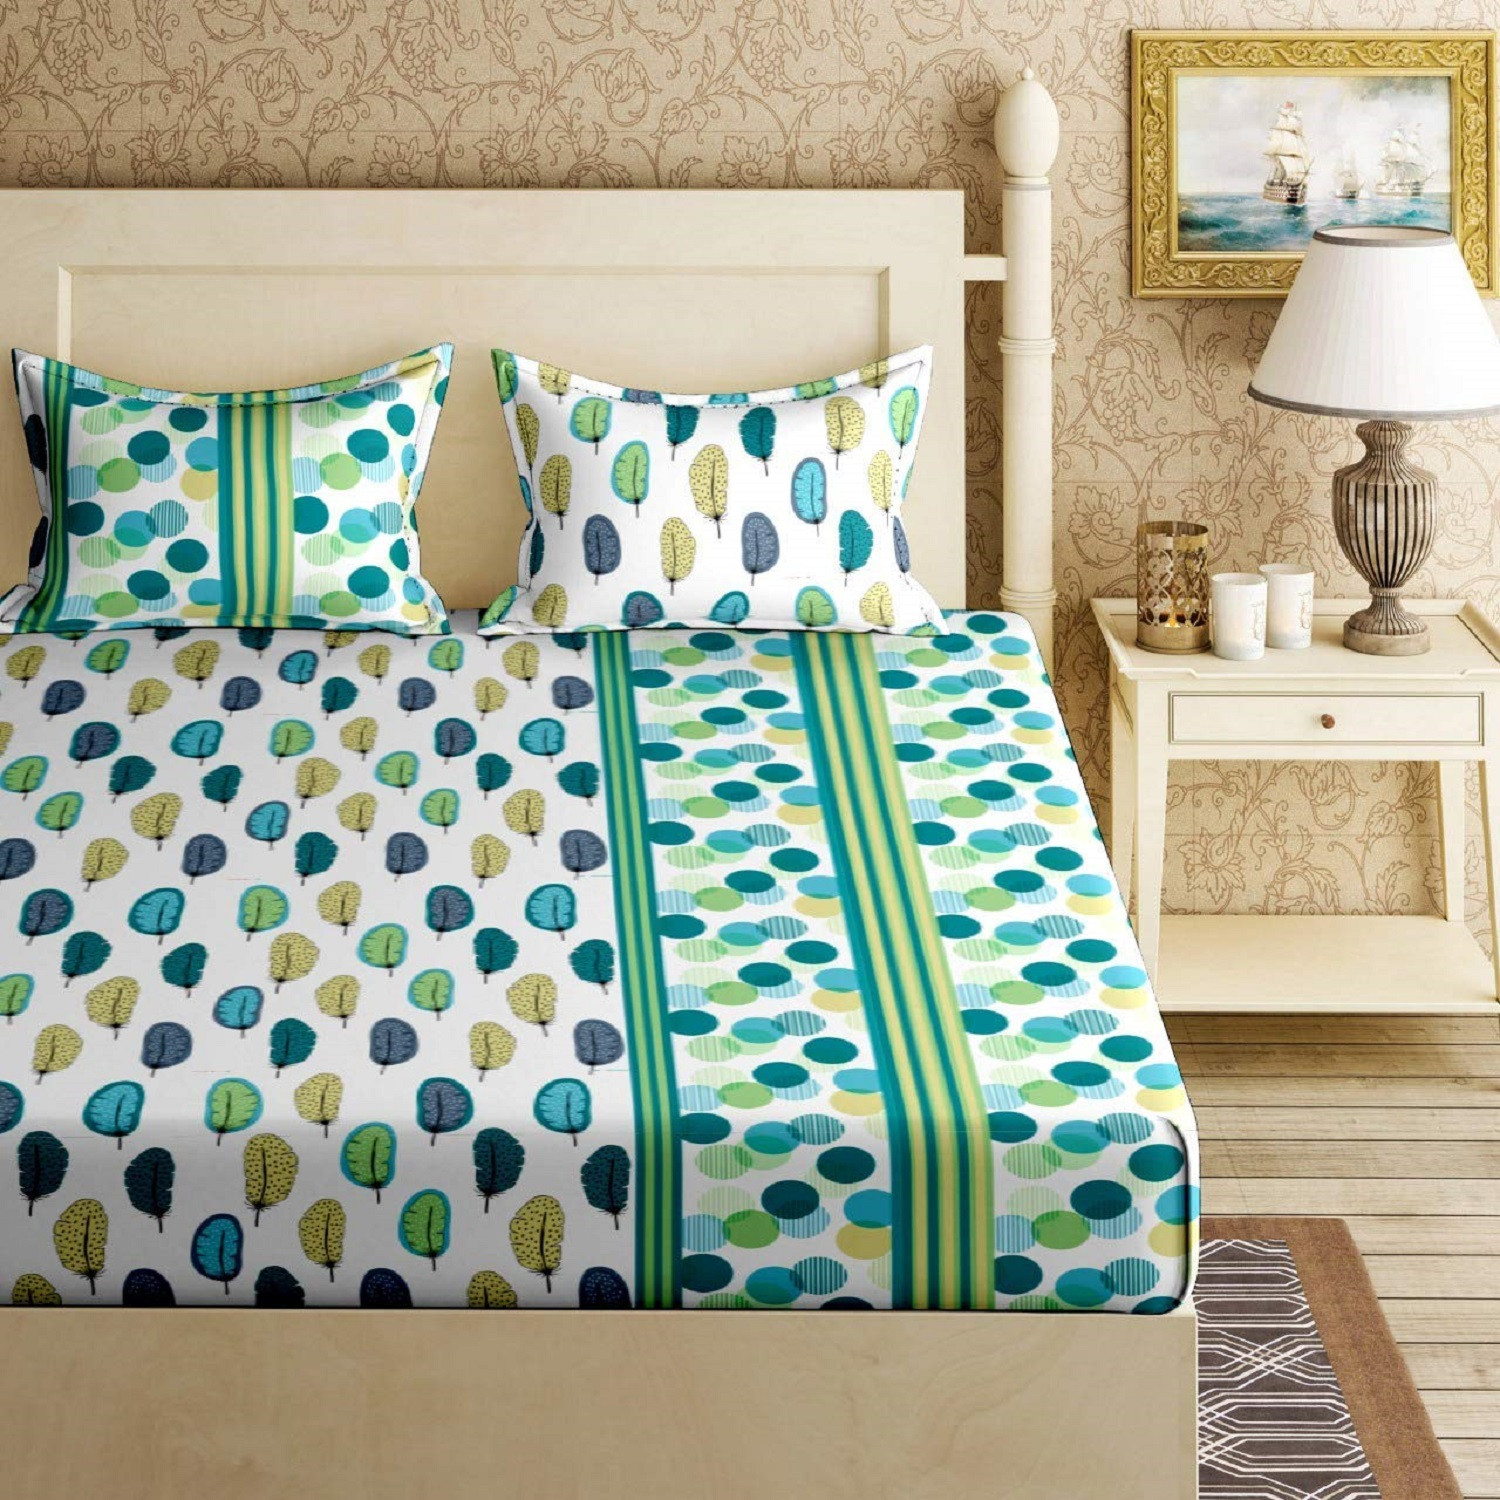 Kuber Industries Wings Print Cotton Double Bedsheet with 2 Pillow Covers (Green)